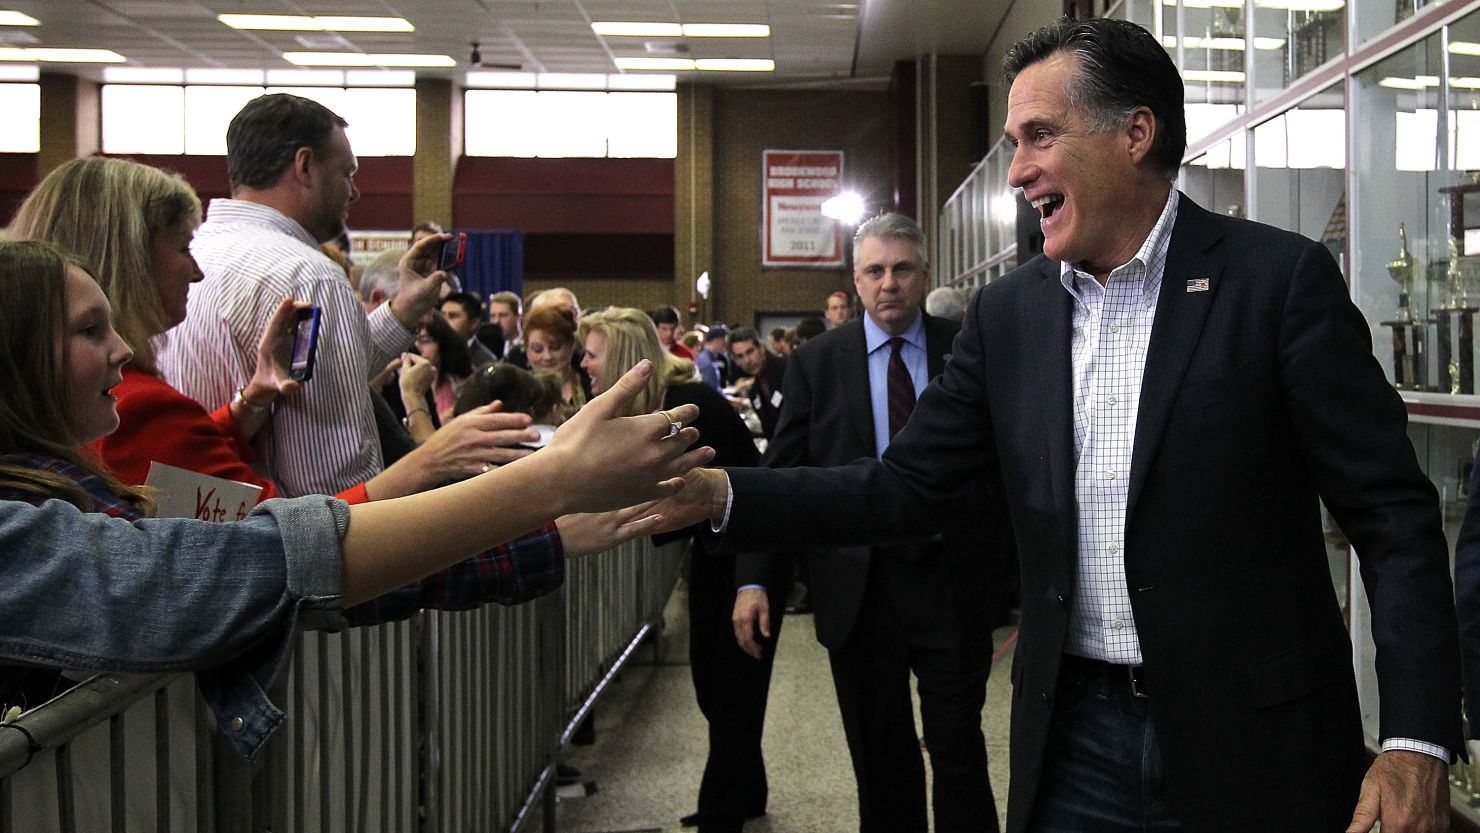 Republican presidential candidate Mitt Romney greets supporters at a pancake breakfast Sunday in Snellville, Georgia.